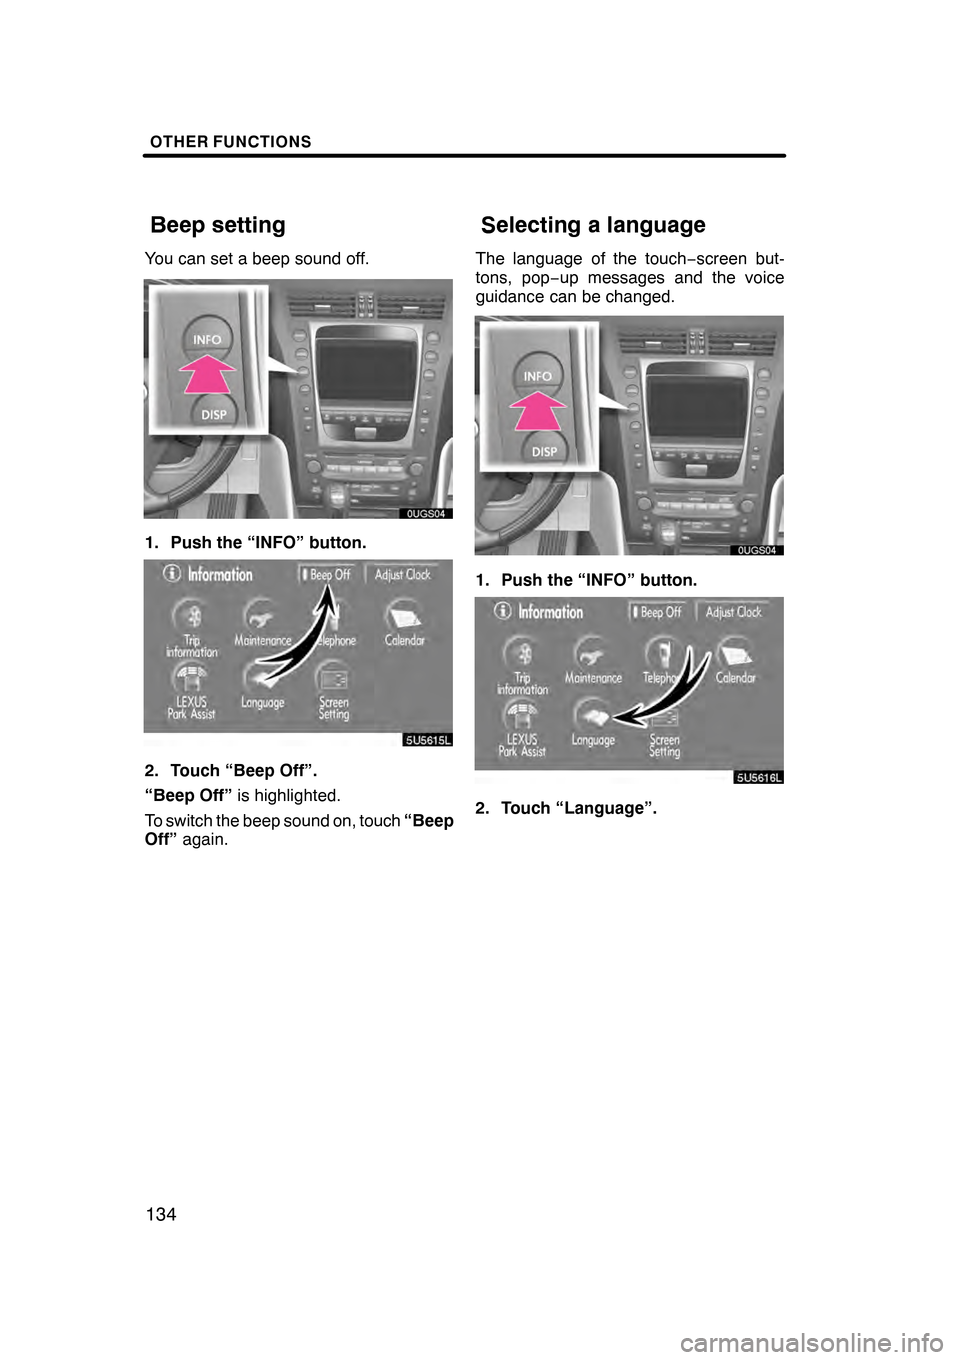 Lexus GS350 2008  Navigation Manual OTHER FUNCTIONS
134
You can set a beep sound off.
1. Push the “INFO” button.
5U5615L
2. Touch “Beep Off”.
“Beep Off”is highlighted.
To switch the beep sound on, touch “Beep
Off” again.